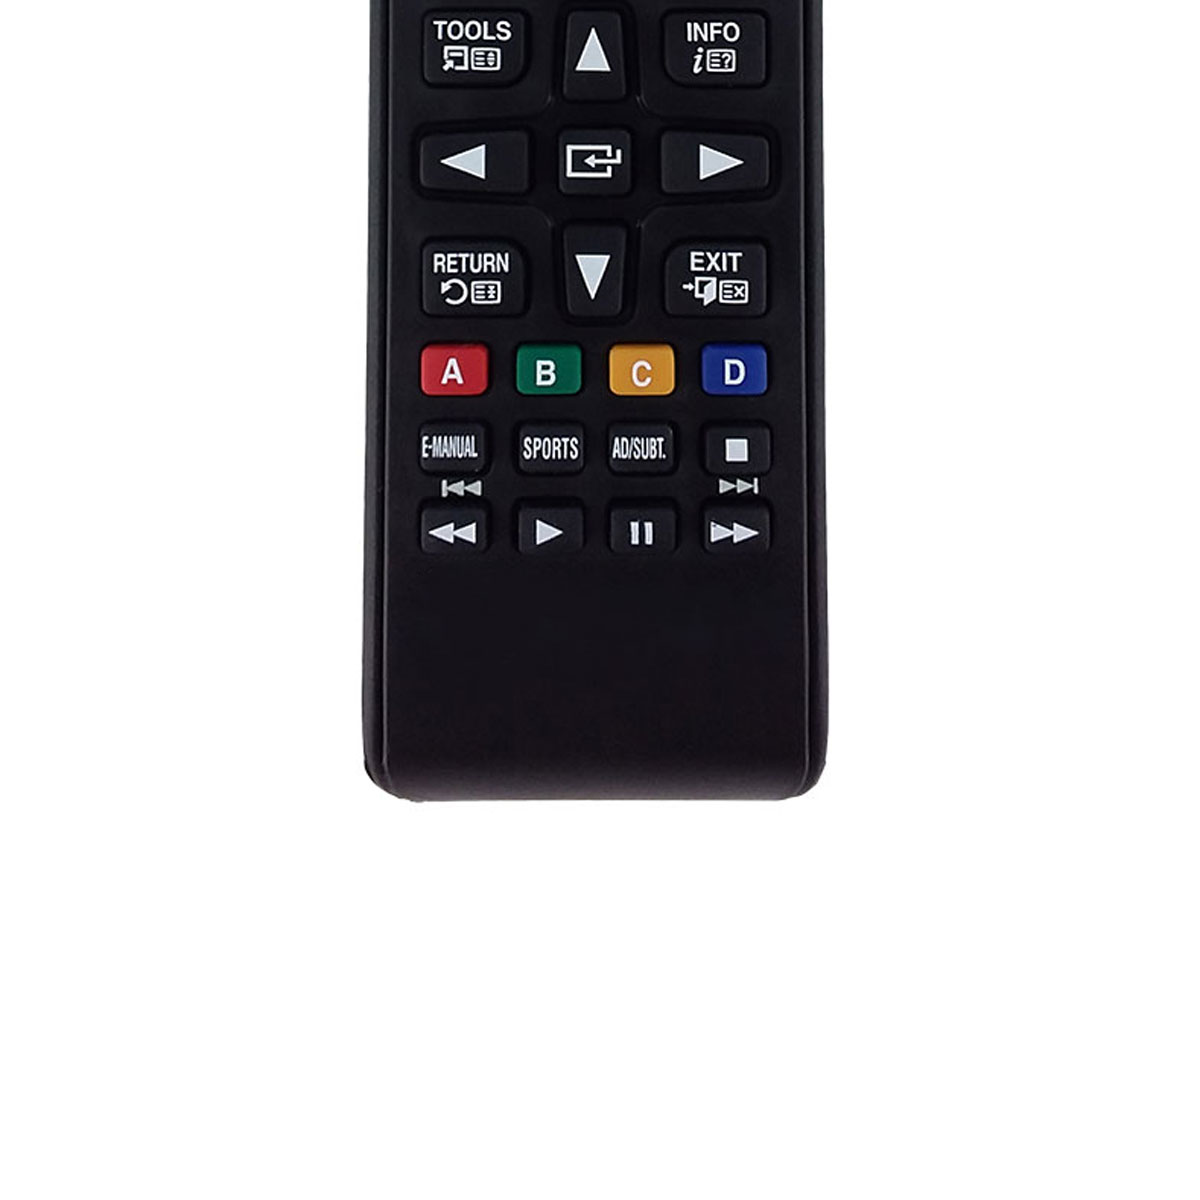 AuraBeam Replacement TV Remote Control for Samsung PN50C680G5FXZA Television